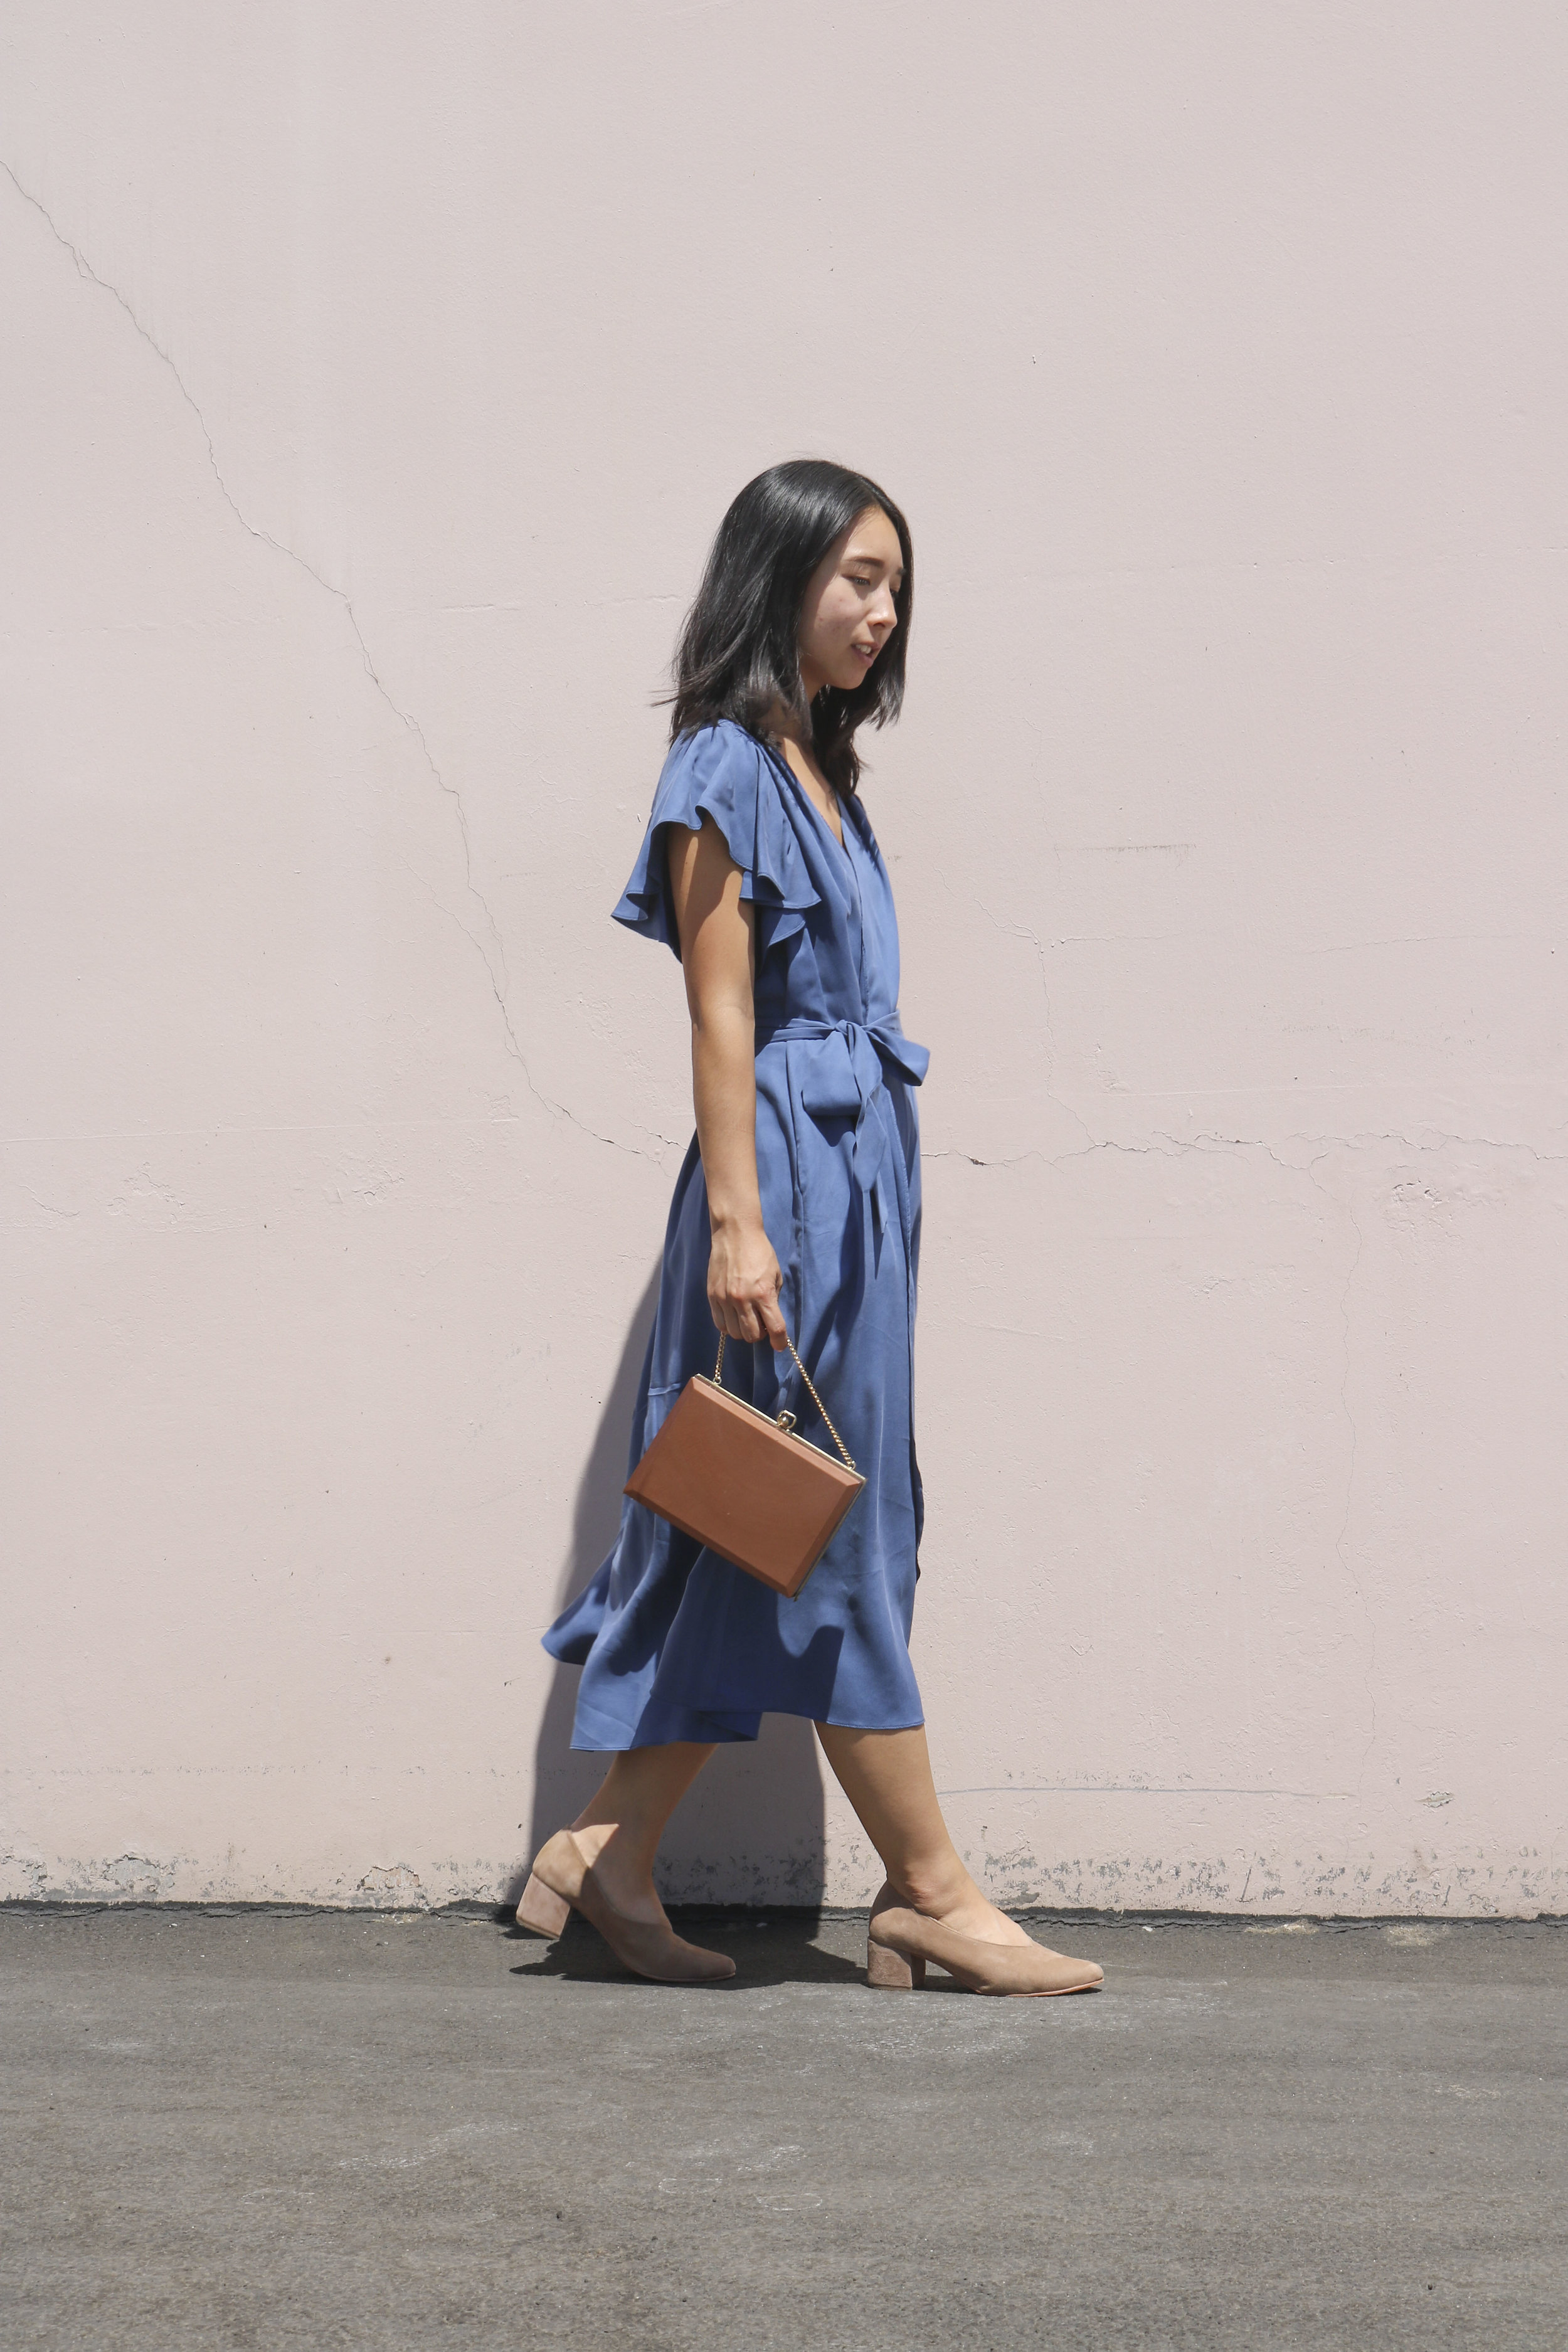 Sarina styles the Belu Pump with a wrap dress by Georgette Crimson and a vintage box purse.&nbsp;